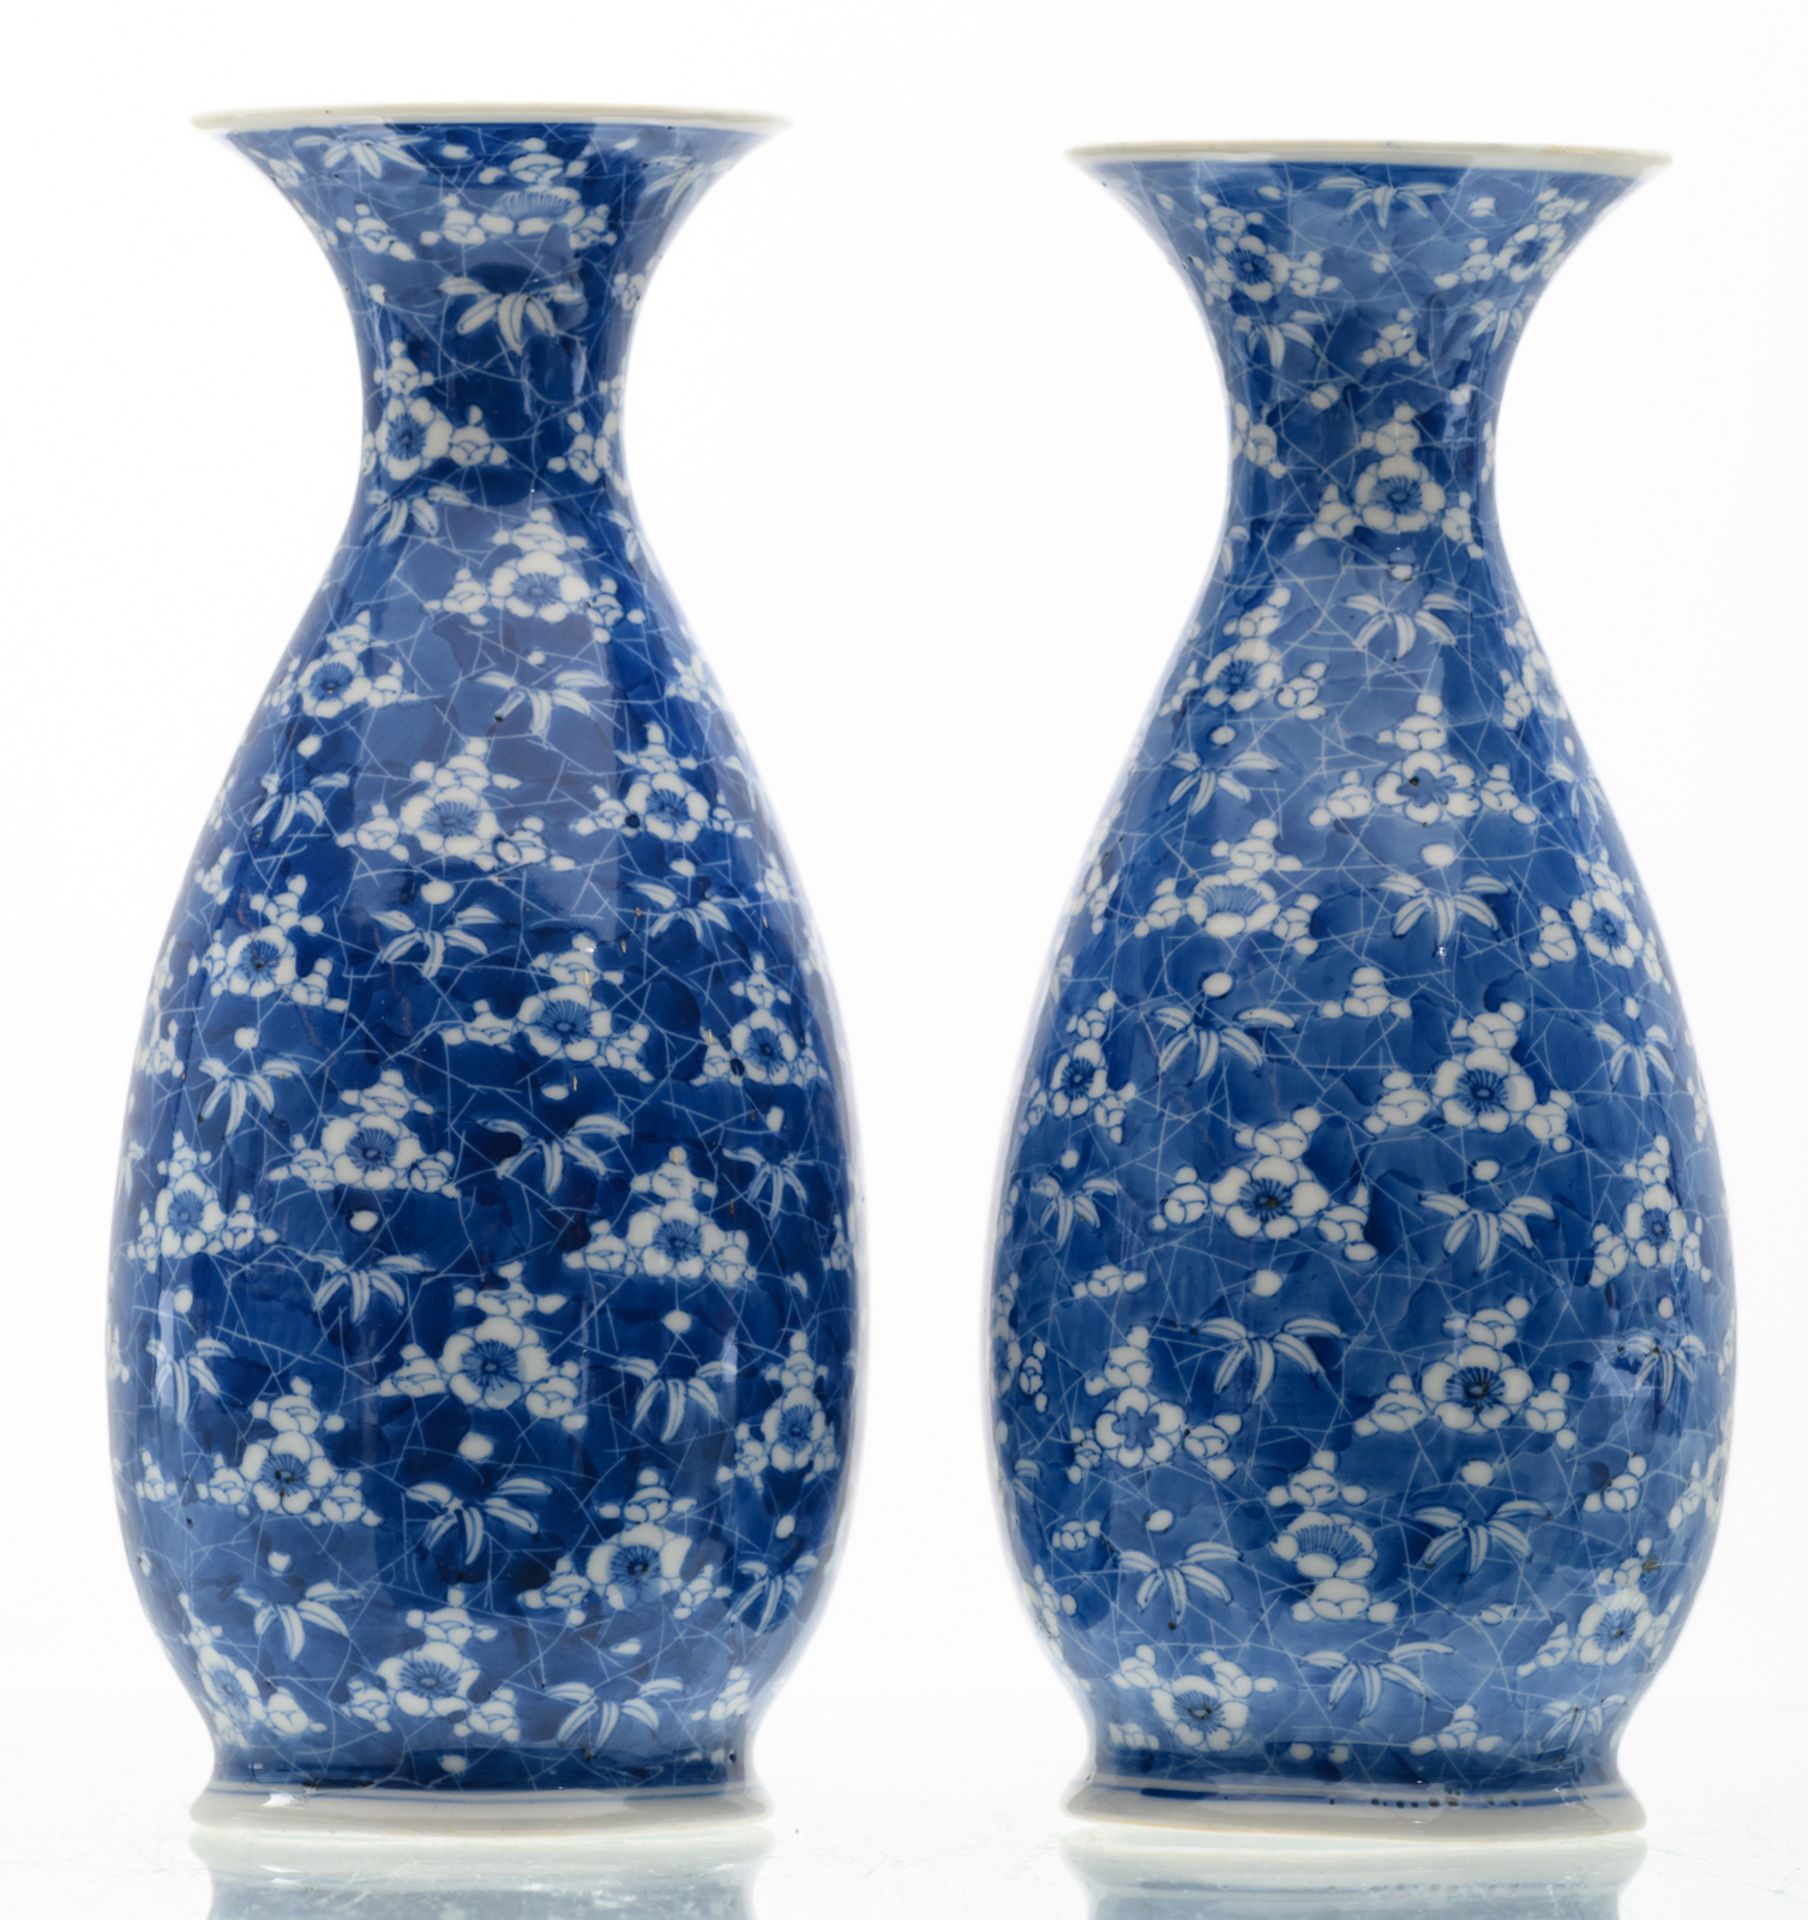 Two Japanese blue and white floral decorated vases, marked, Meiji and period, H 26 cm - Image 4 of 6